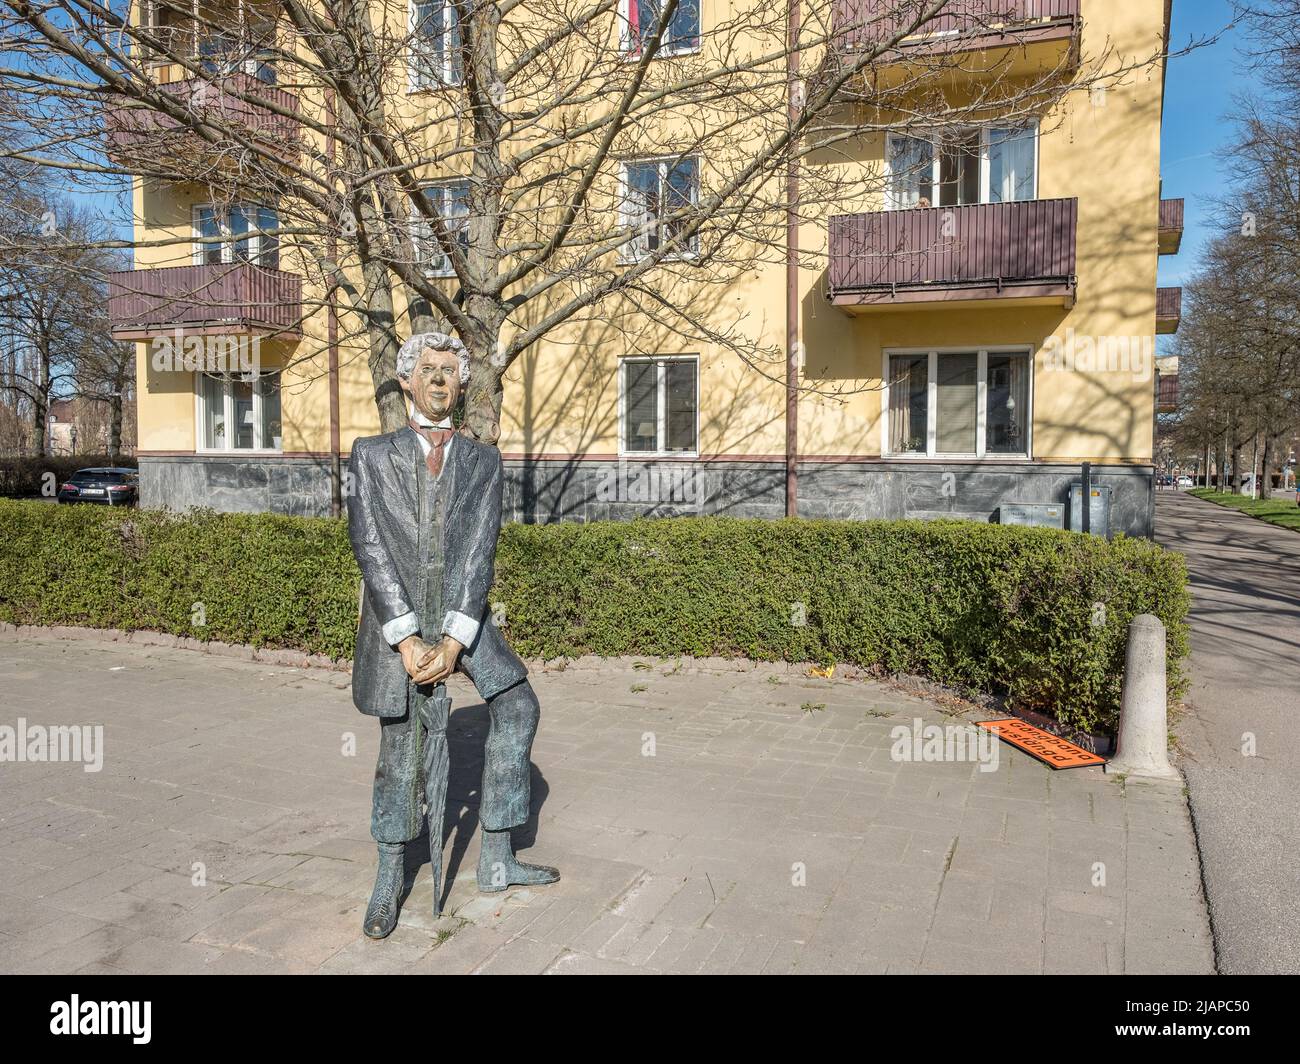 Sculpture by KG Bejemark of Swedish author and humorist Tage Danielsson in Linkoping, Sweden Stock Photo